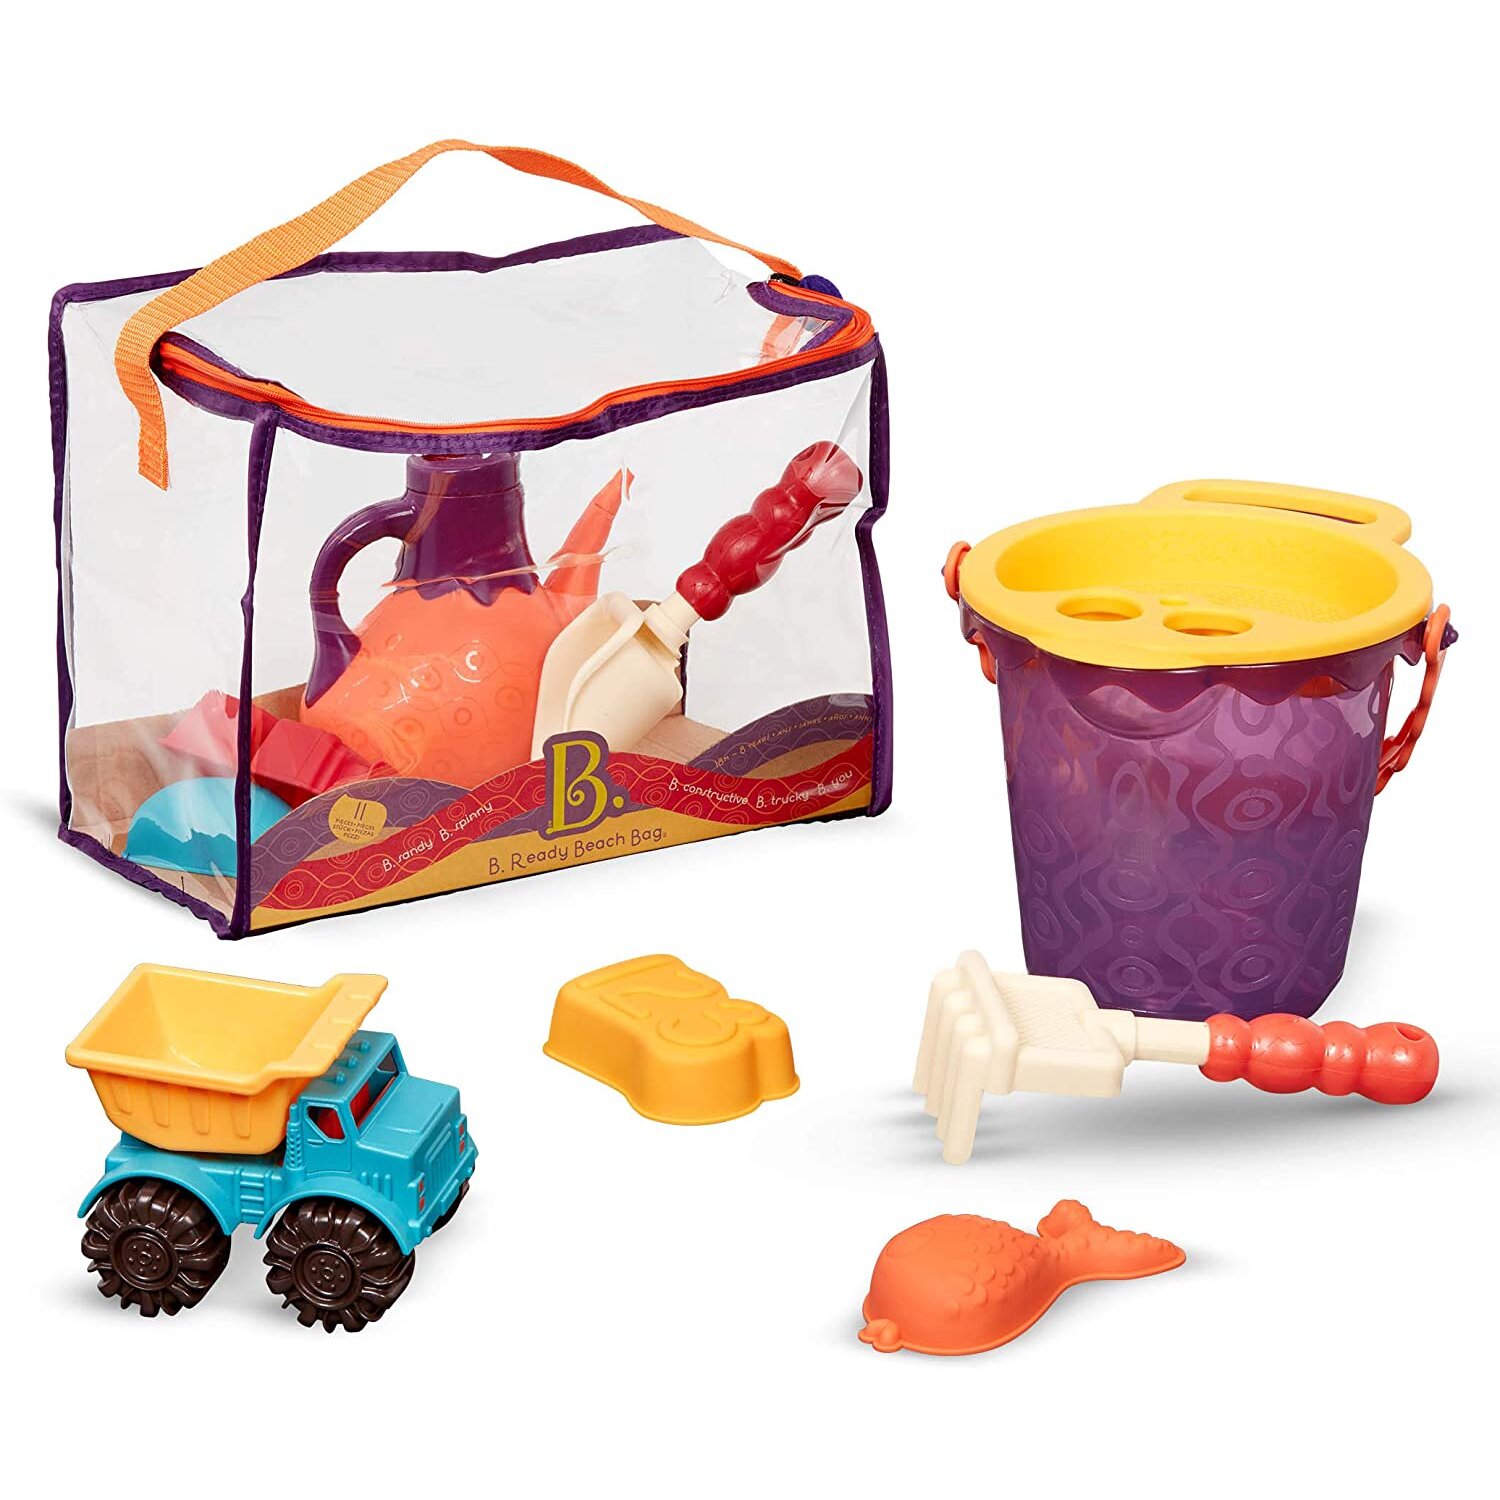 B. Toys – B. Ready Beach Bag – Beach Tote with Mesh Panel and 11 Funky Sand Toys – 18 M+ BX1308C1Z